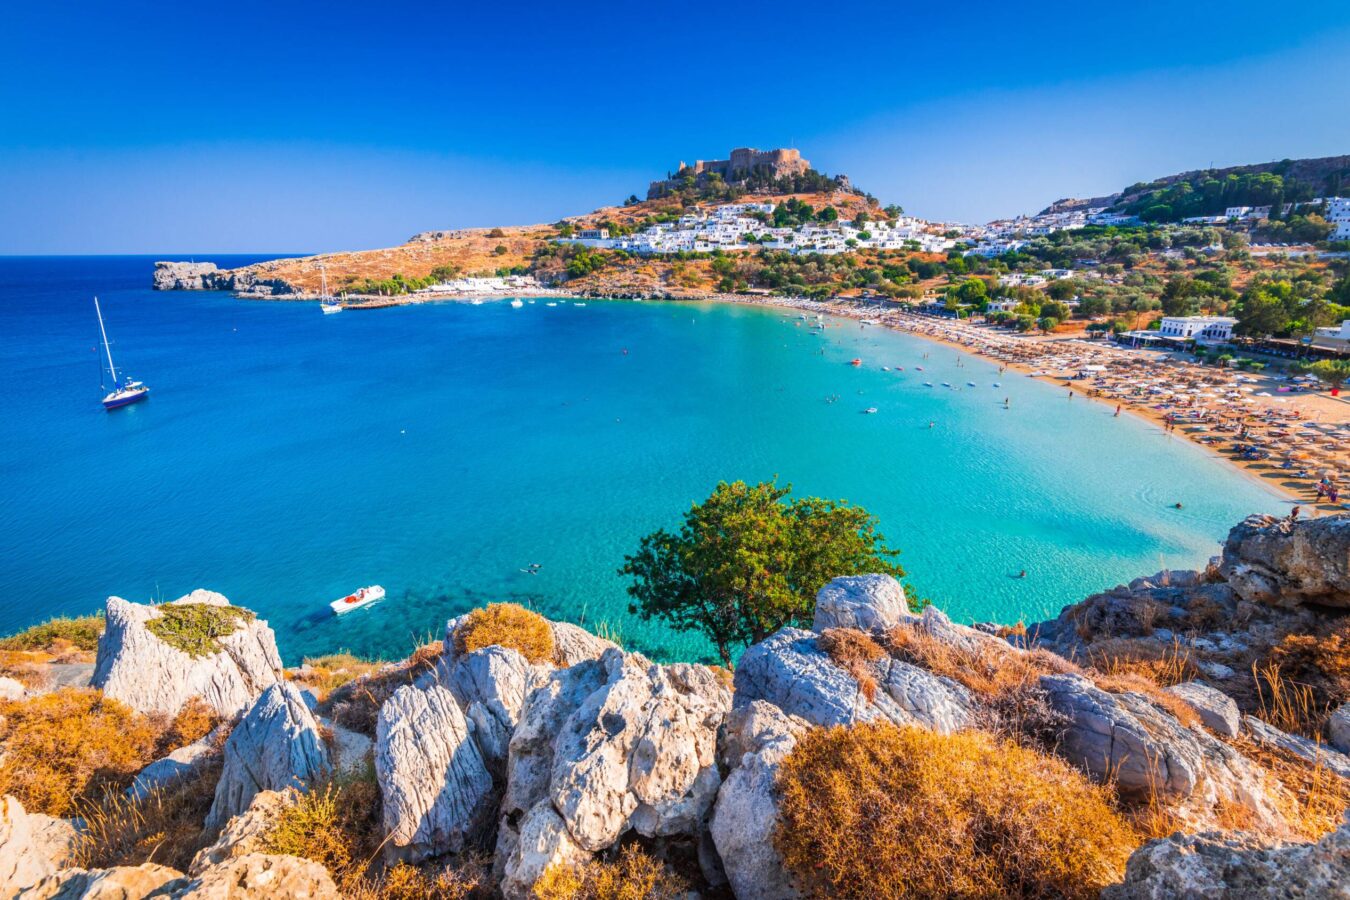 The beach and the Acropolis are definitely among the top things to do in Lindos